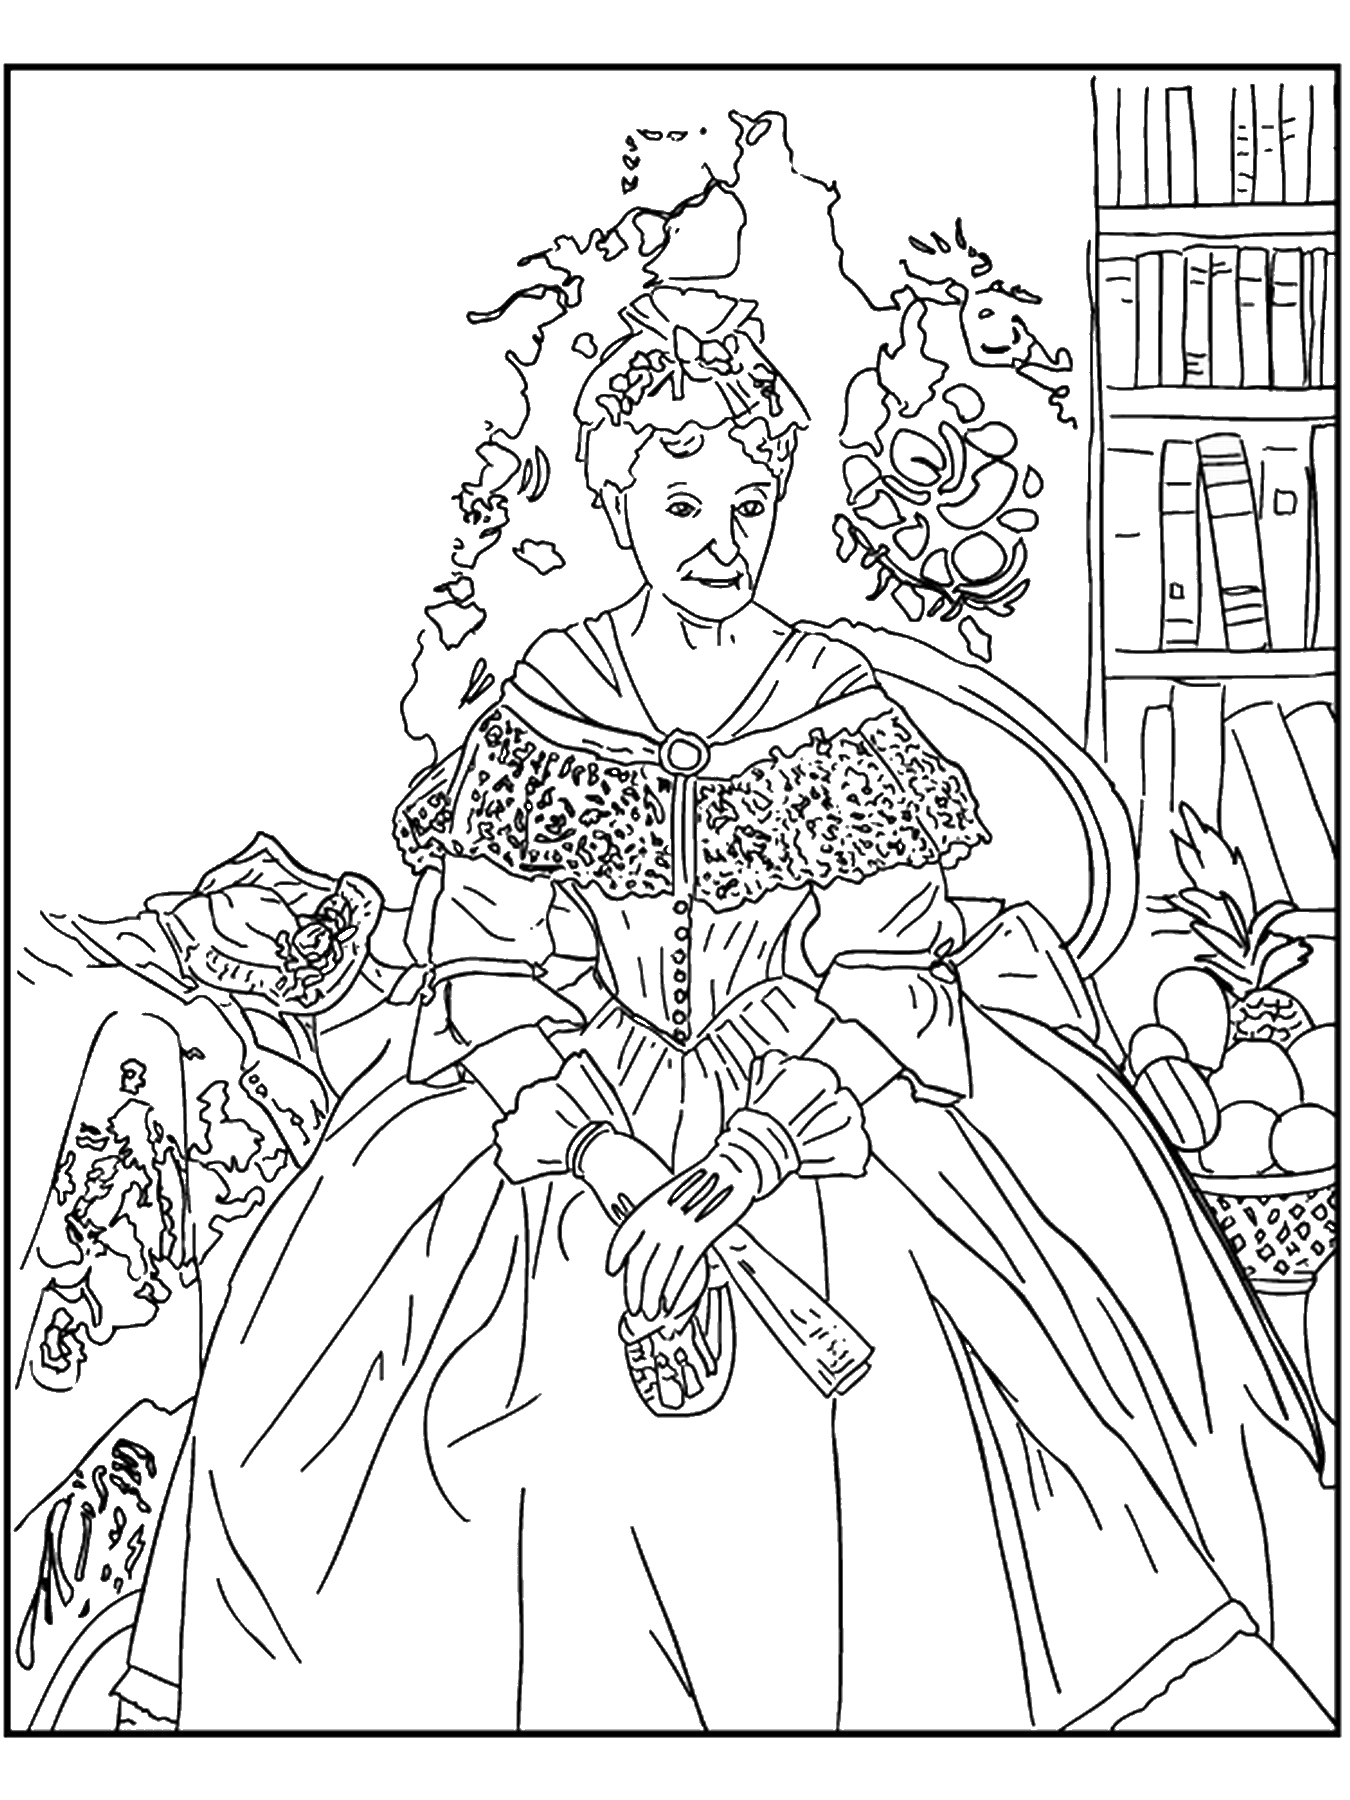 famous-paintings-coloring-pages-printable-printable-templates